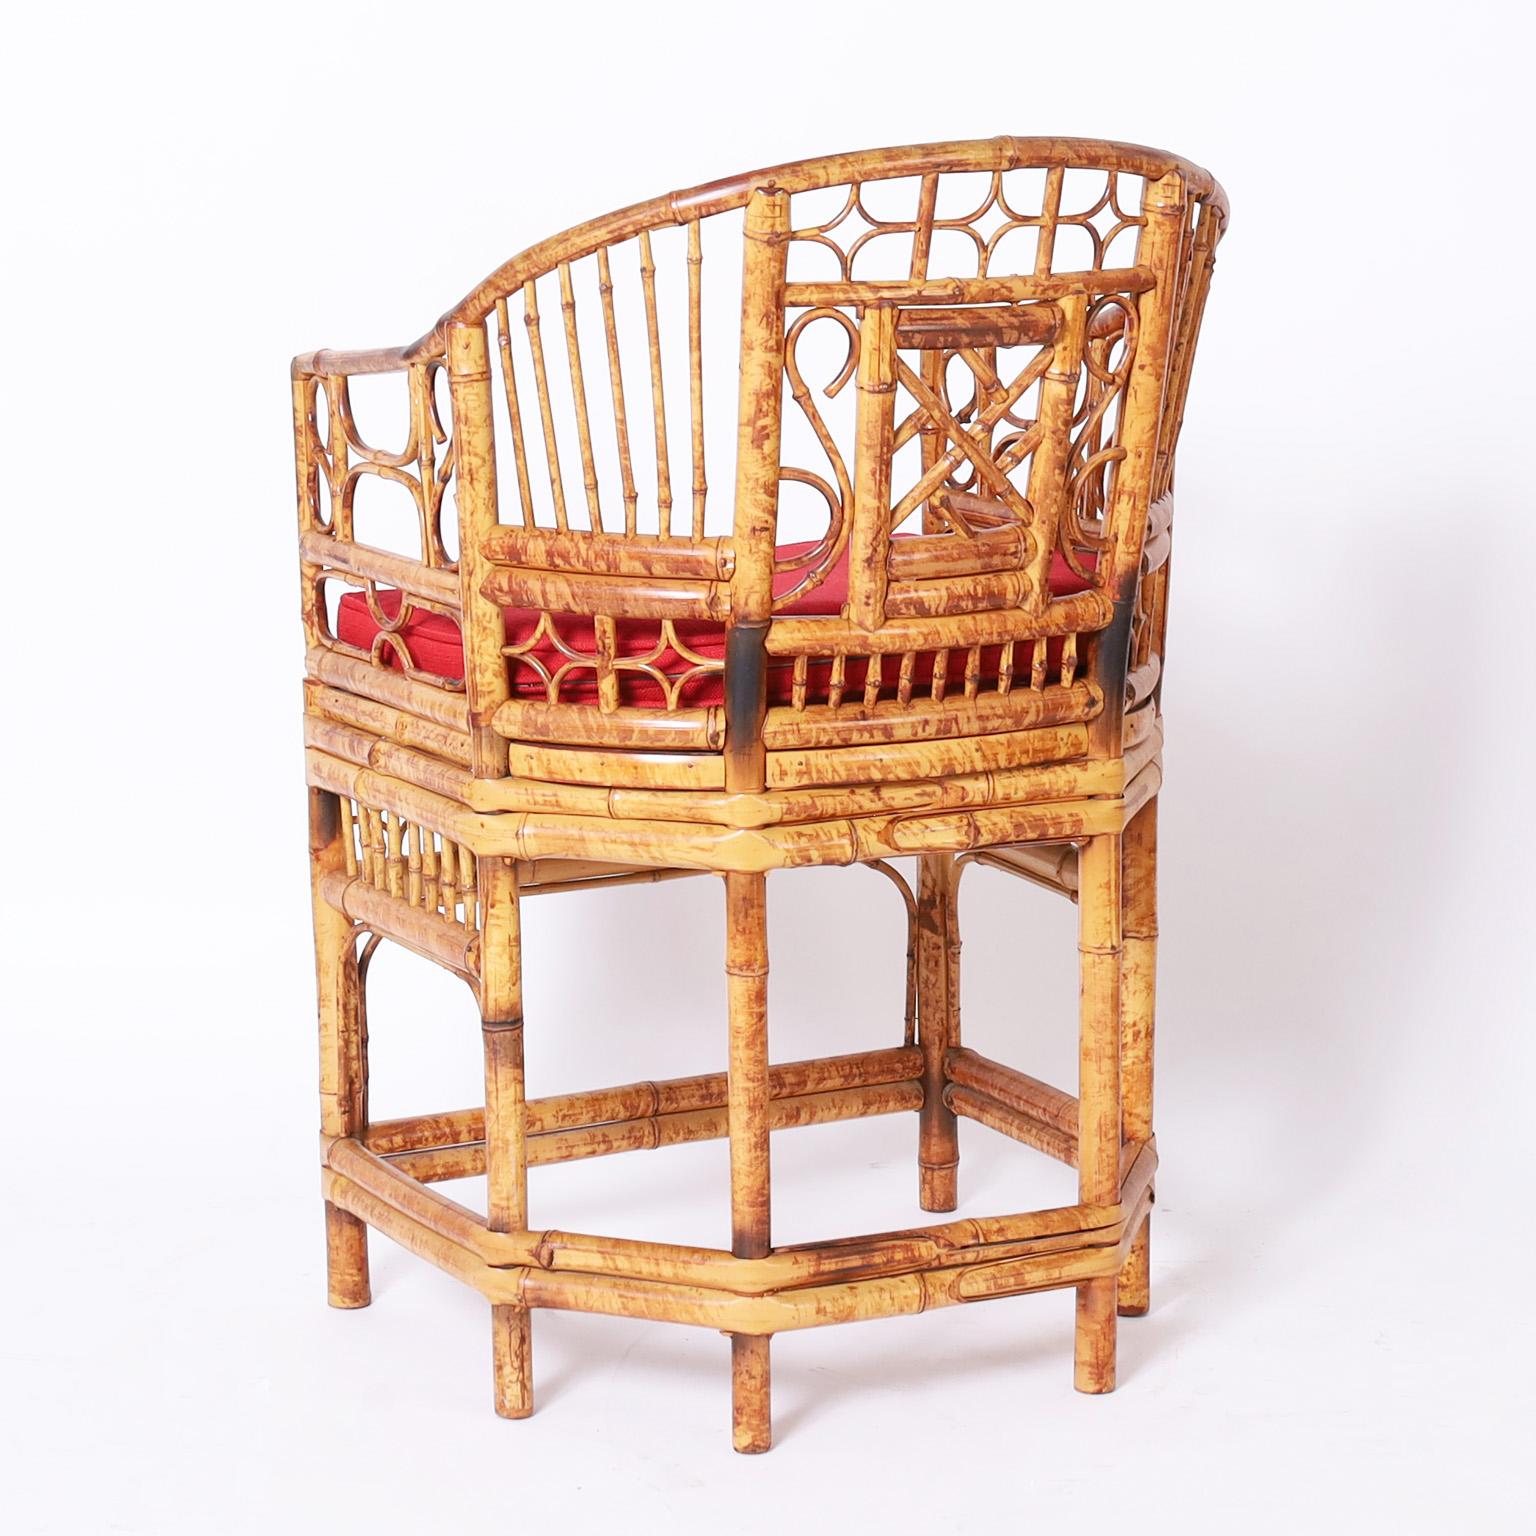 Hand-Crafted Pair of Brighton Pavilion Style Chairs